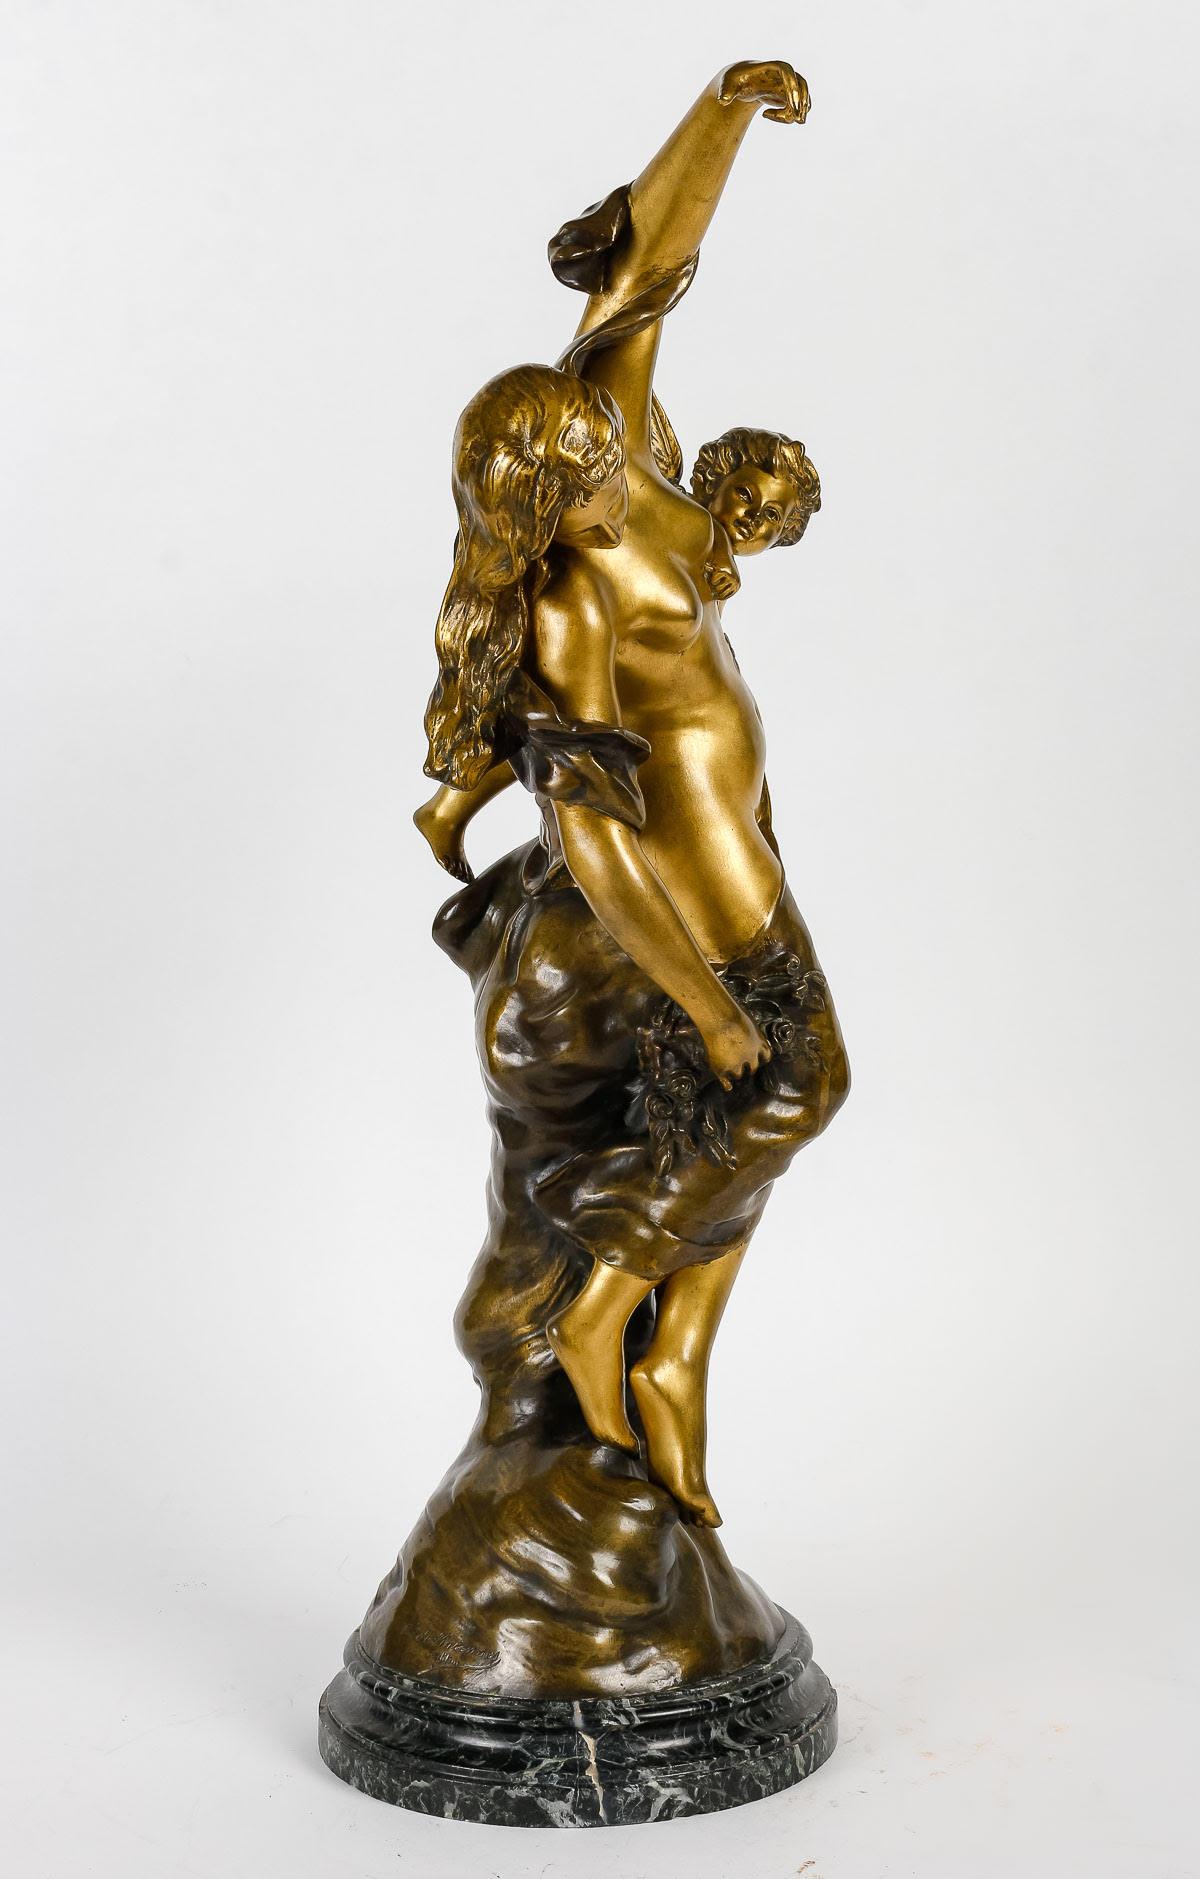 Gilt Sculpture in Gilded and Patinated Bronze, Signed 